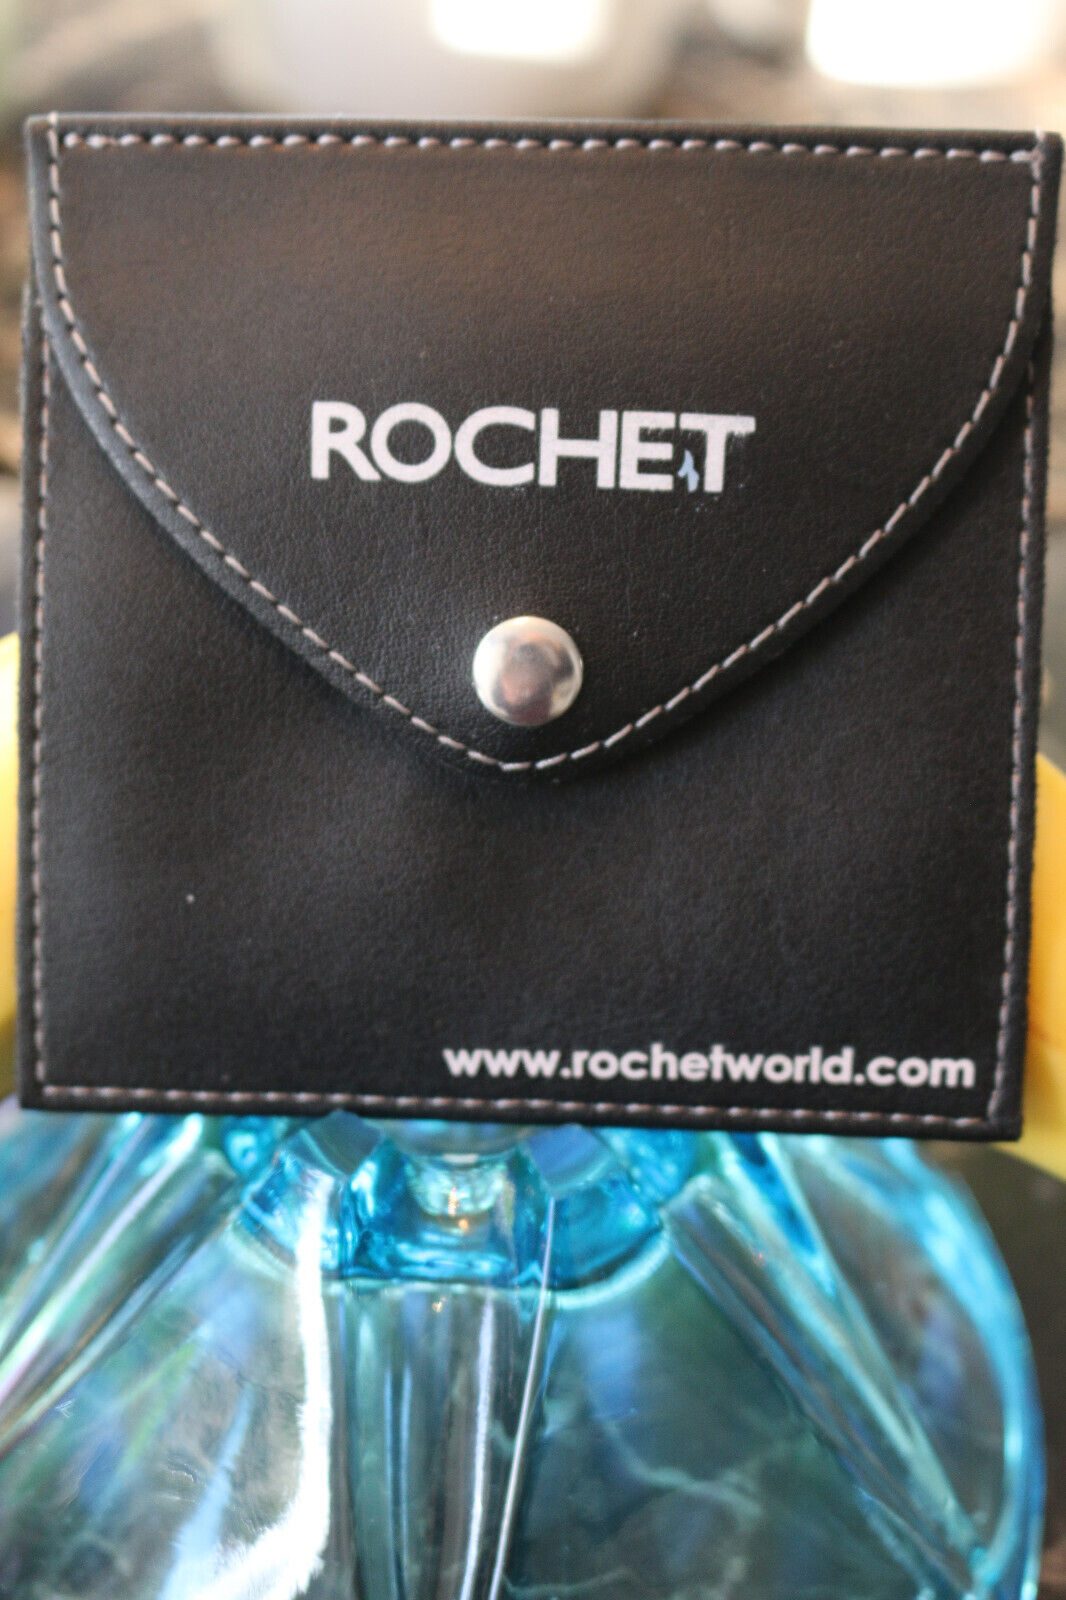 Rochet World Pocket Watch Case Protector Leather